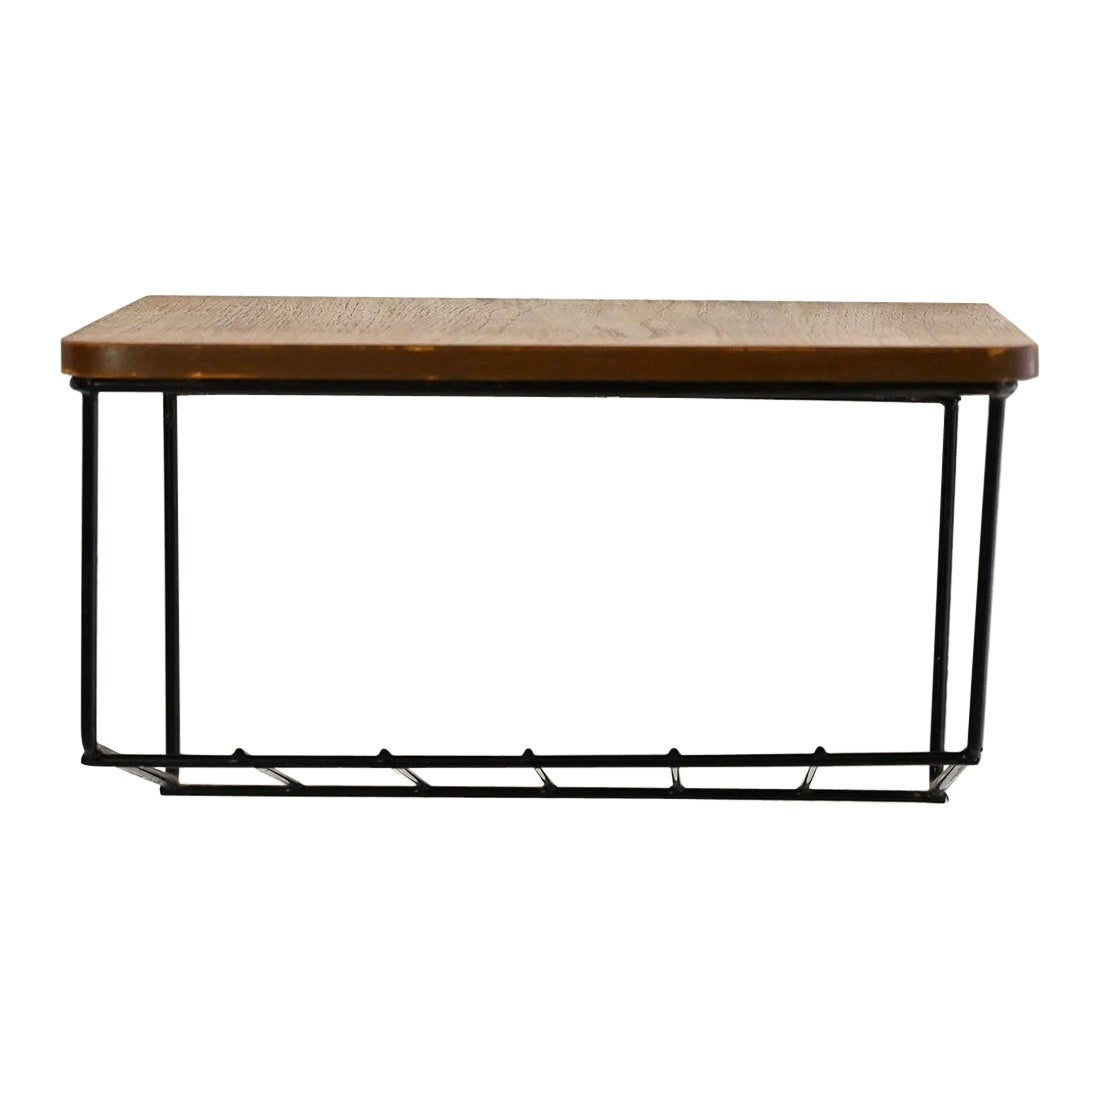 Swedish suspended bedside table in metal and teak